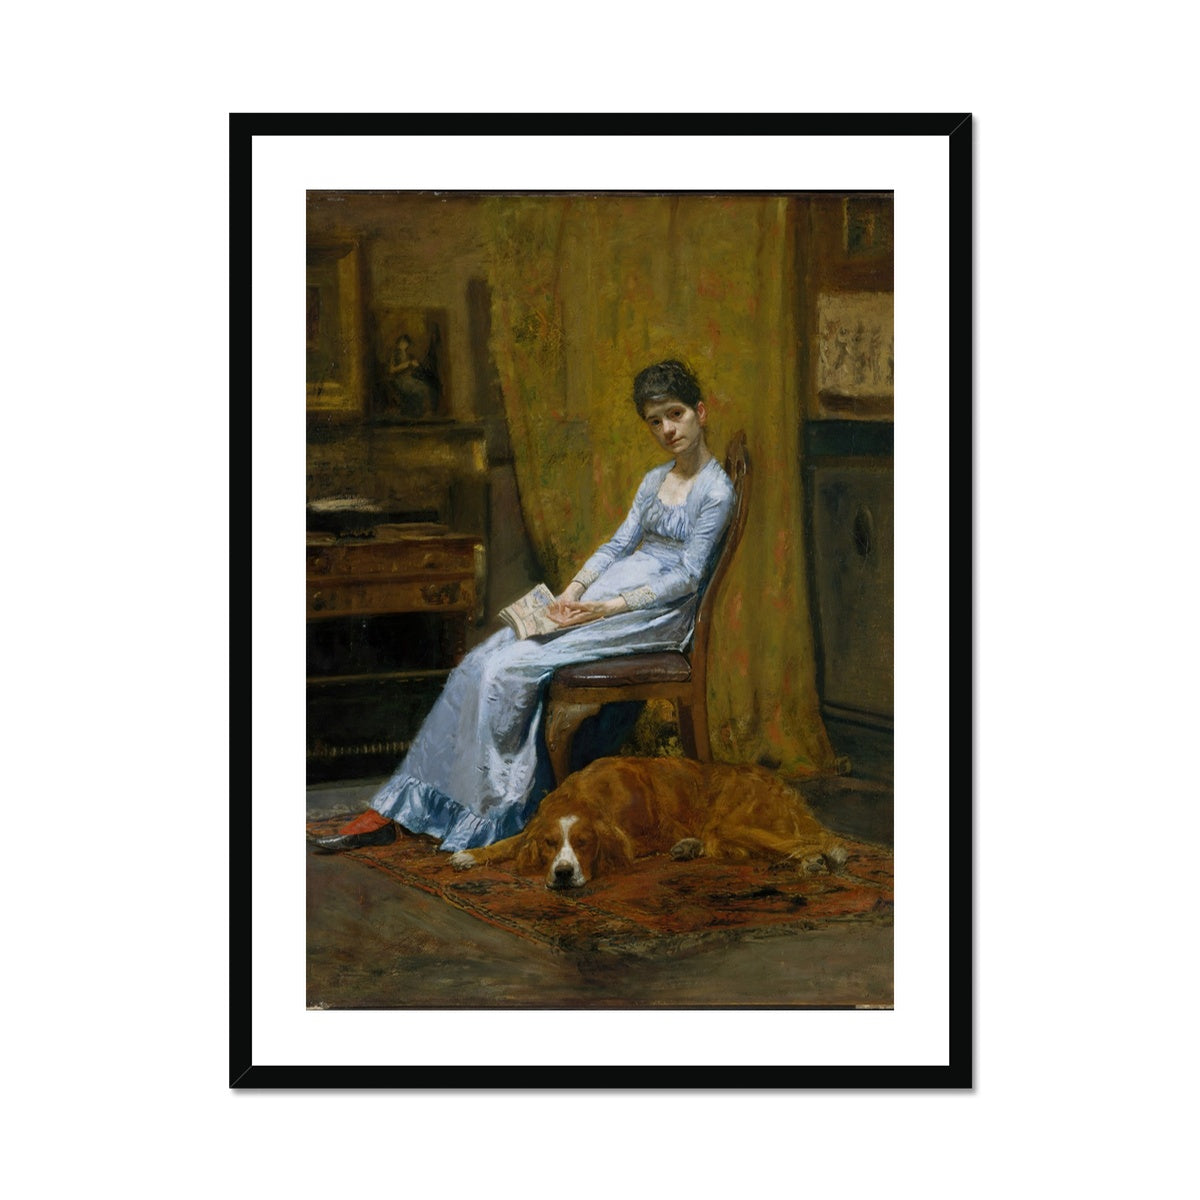 The Artist's Wife and His Setter Dog, Thomas Eakins, 1849, Framed & Mounted Print Ramble & Roam